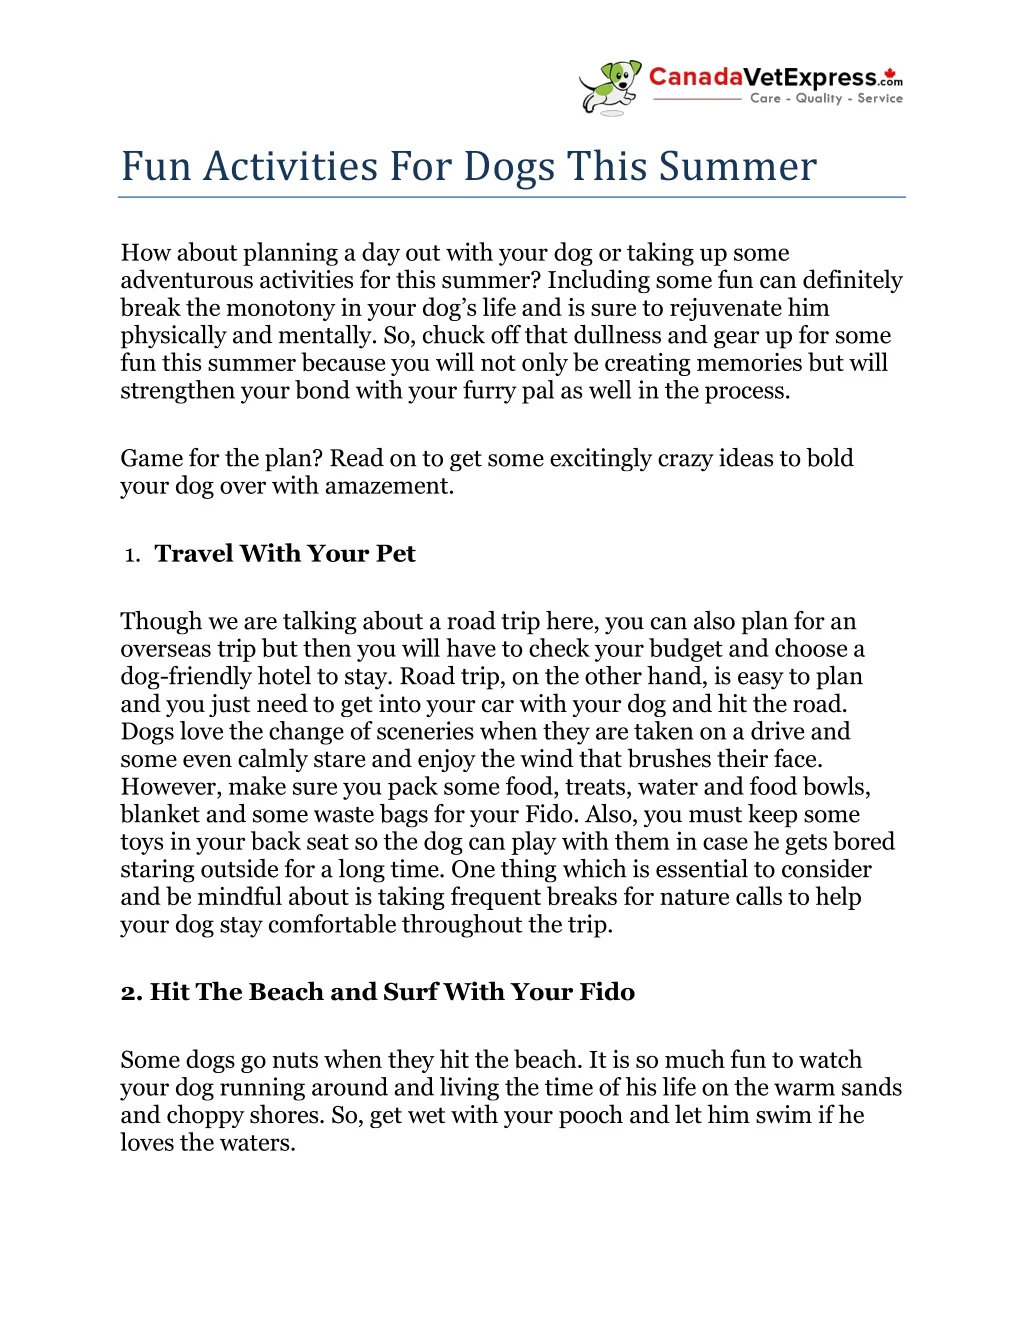 fun activities for dogs this summer